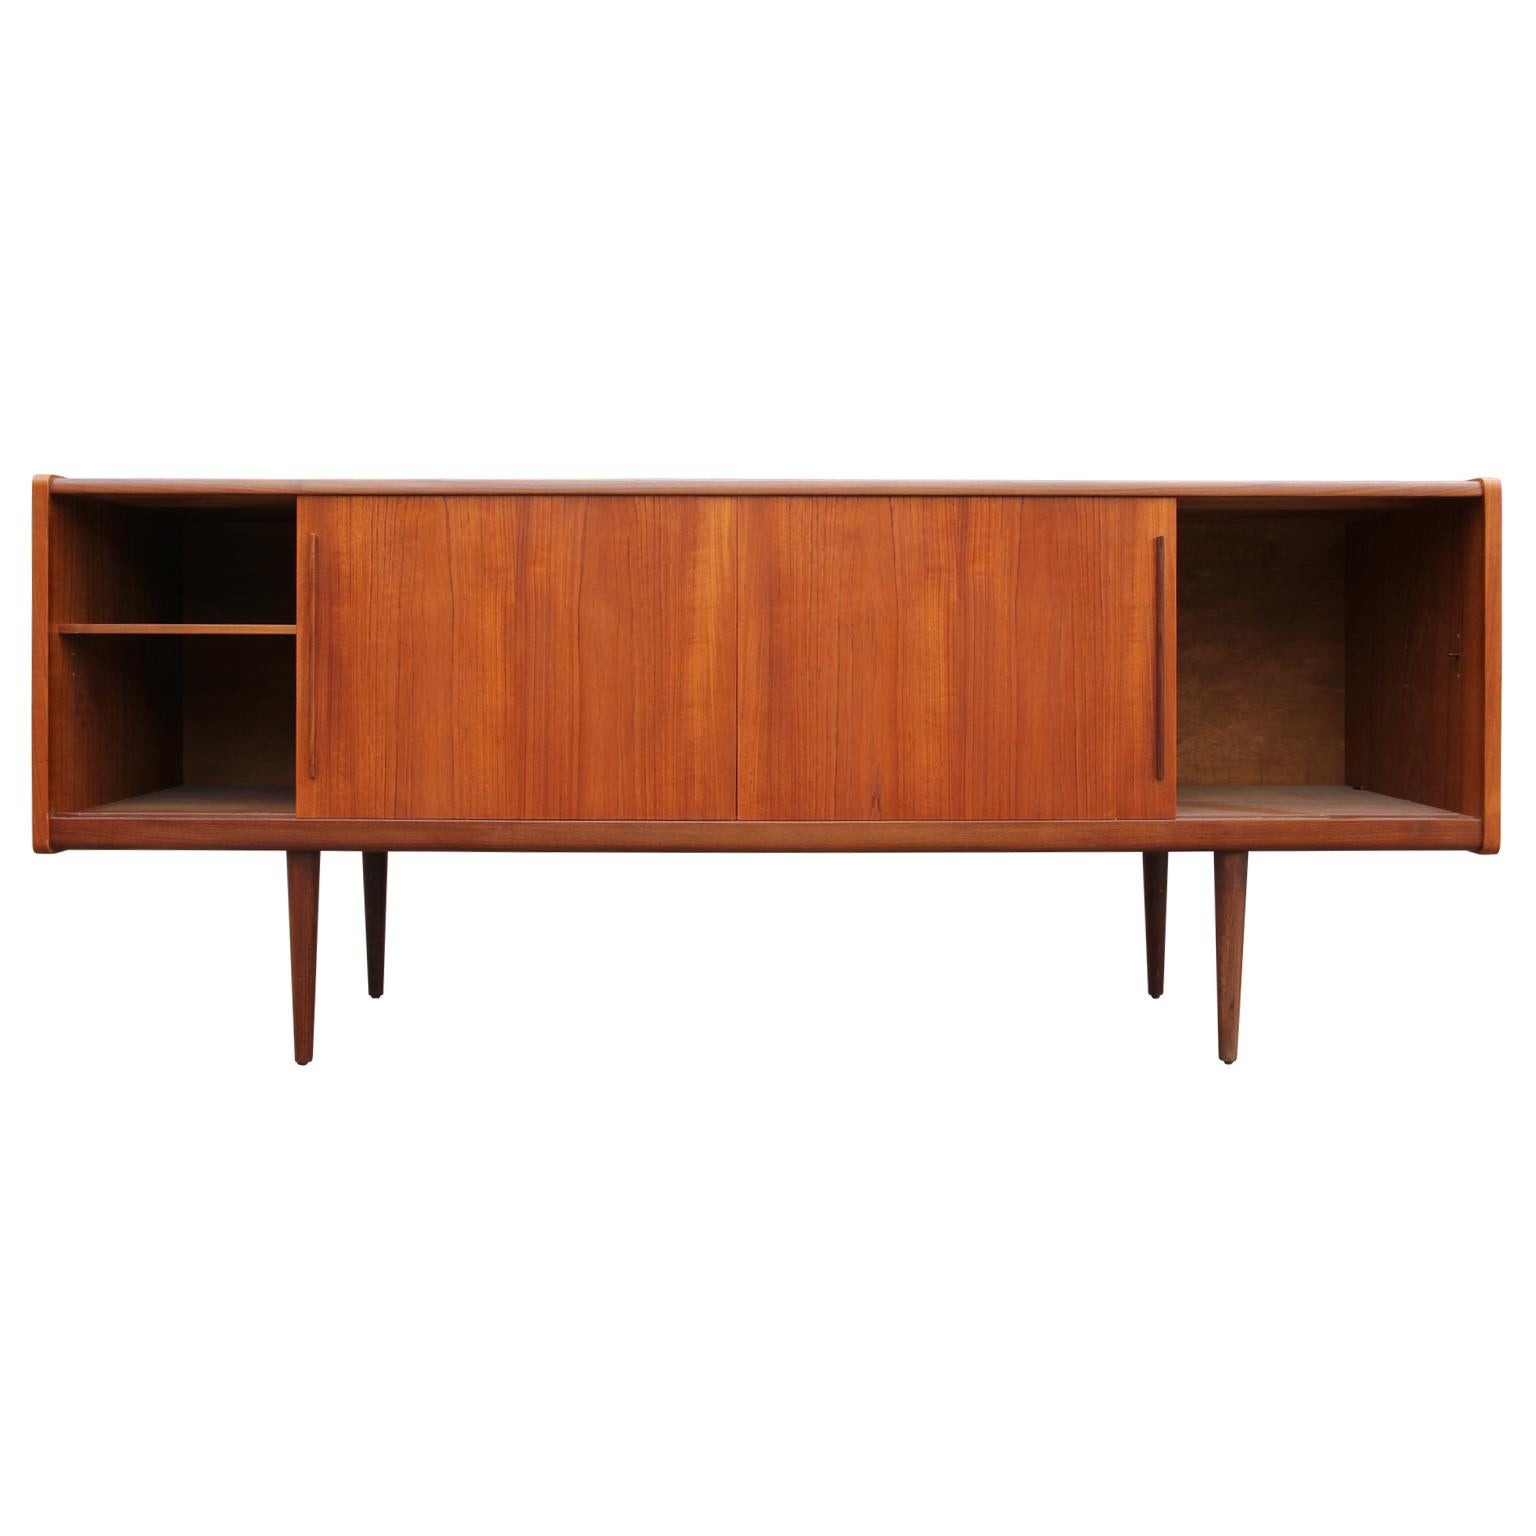 European Danish Modern Teak Sideboard / Credenza with Drawers and Sliding Door Cabinets